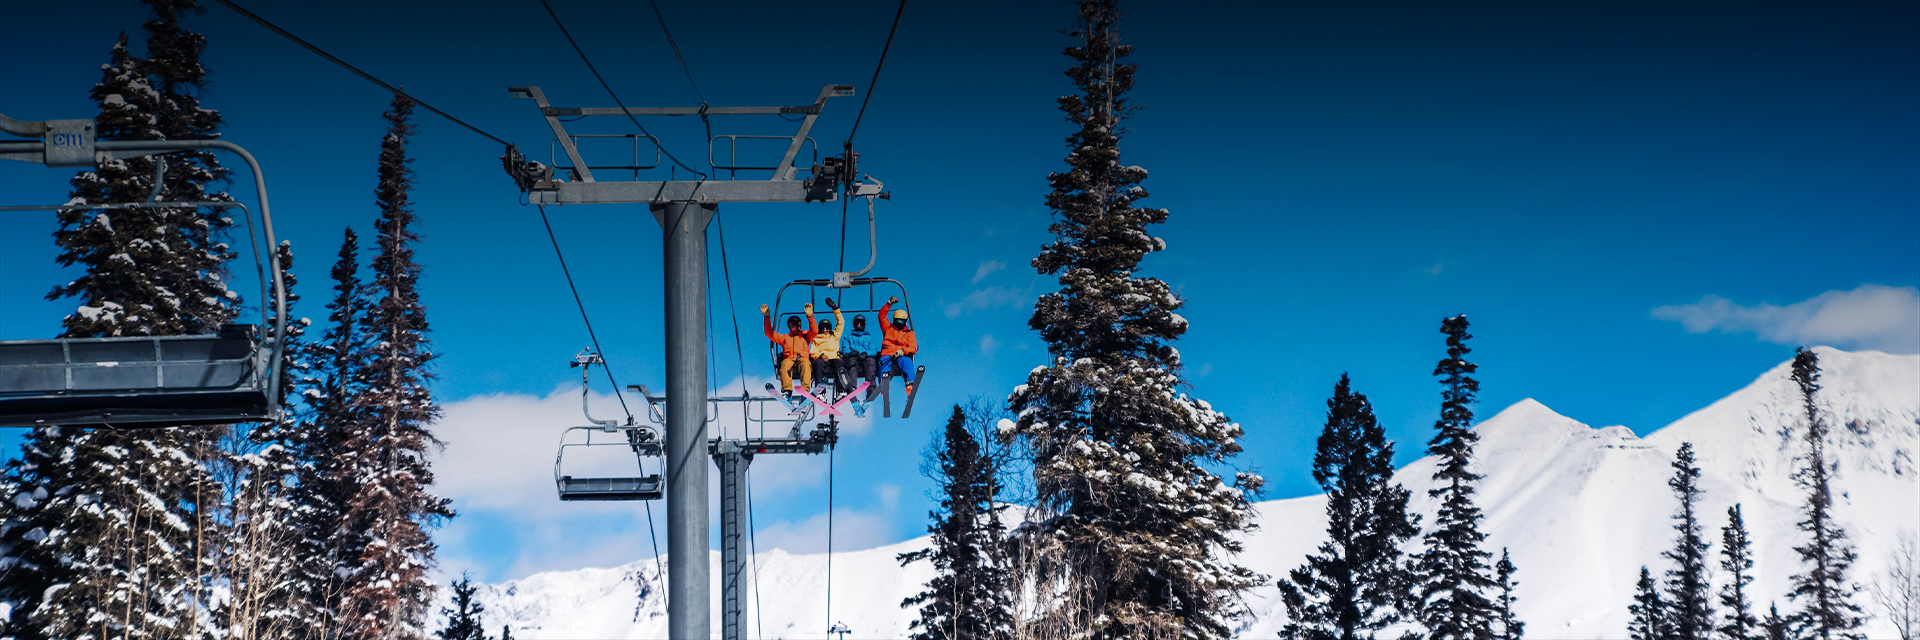 a zoomed out view of people on the ski lift during the day